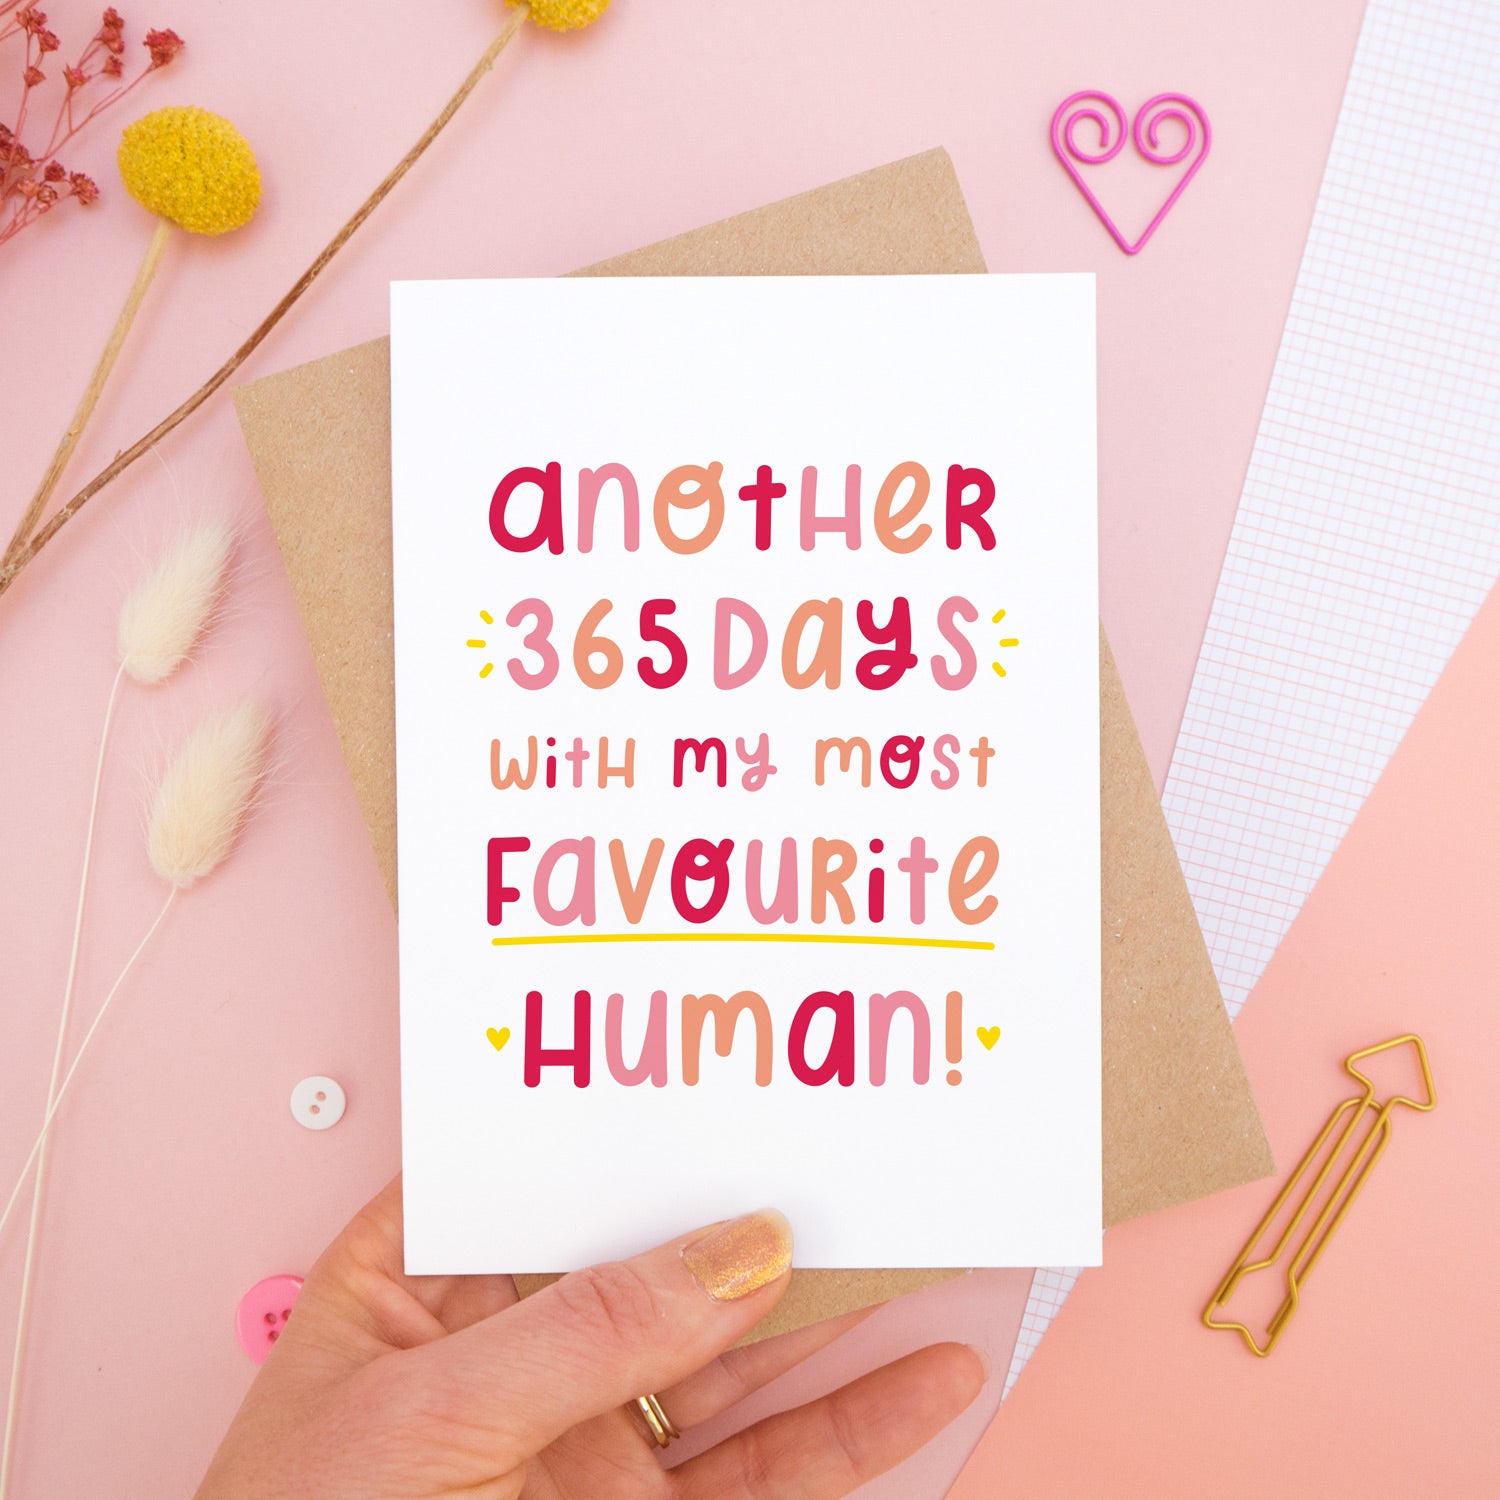 The 'another 365 days with my most favourite human' card photographed on a pink background with dried flowers, buttons and paper clips as props. The card itself is being held above the scene.